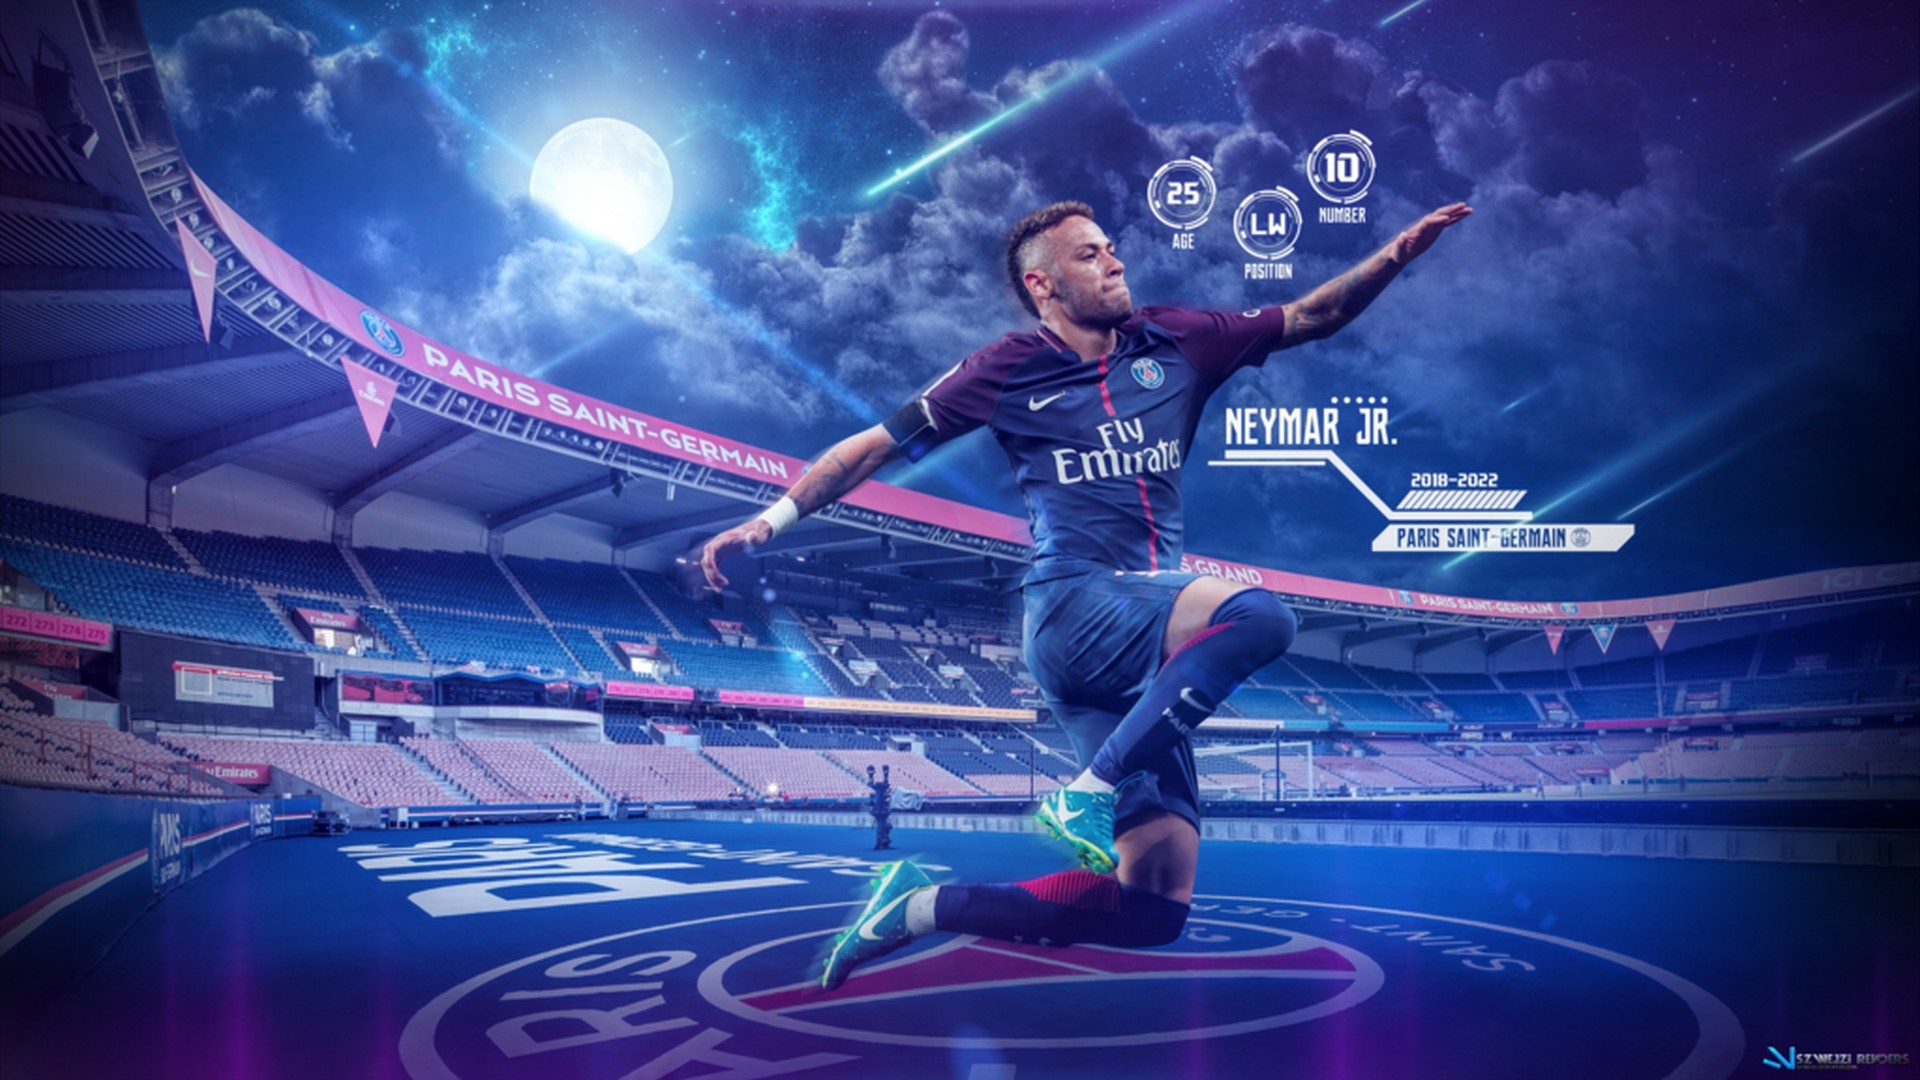 Wallpaper Neymar Desktop with resolution 1920X1080 pixel. You can use this wallpaper as background for your desktop Computer Screensavers, Android or iPhone smartphones